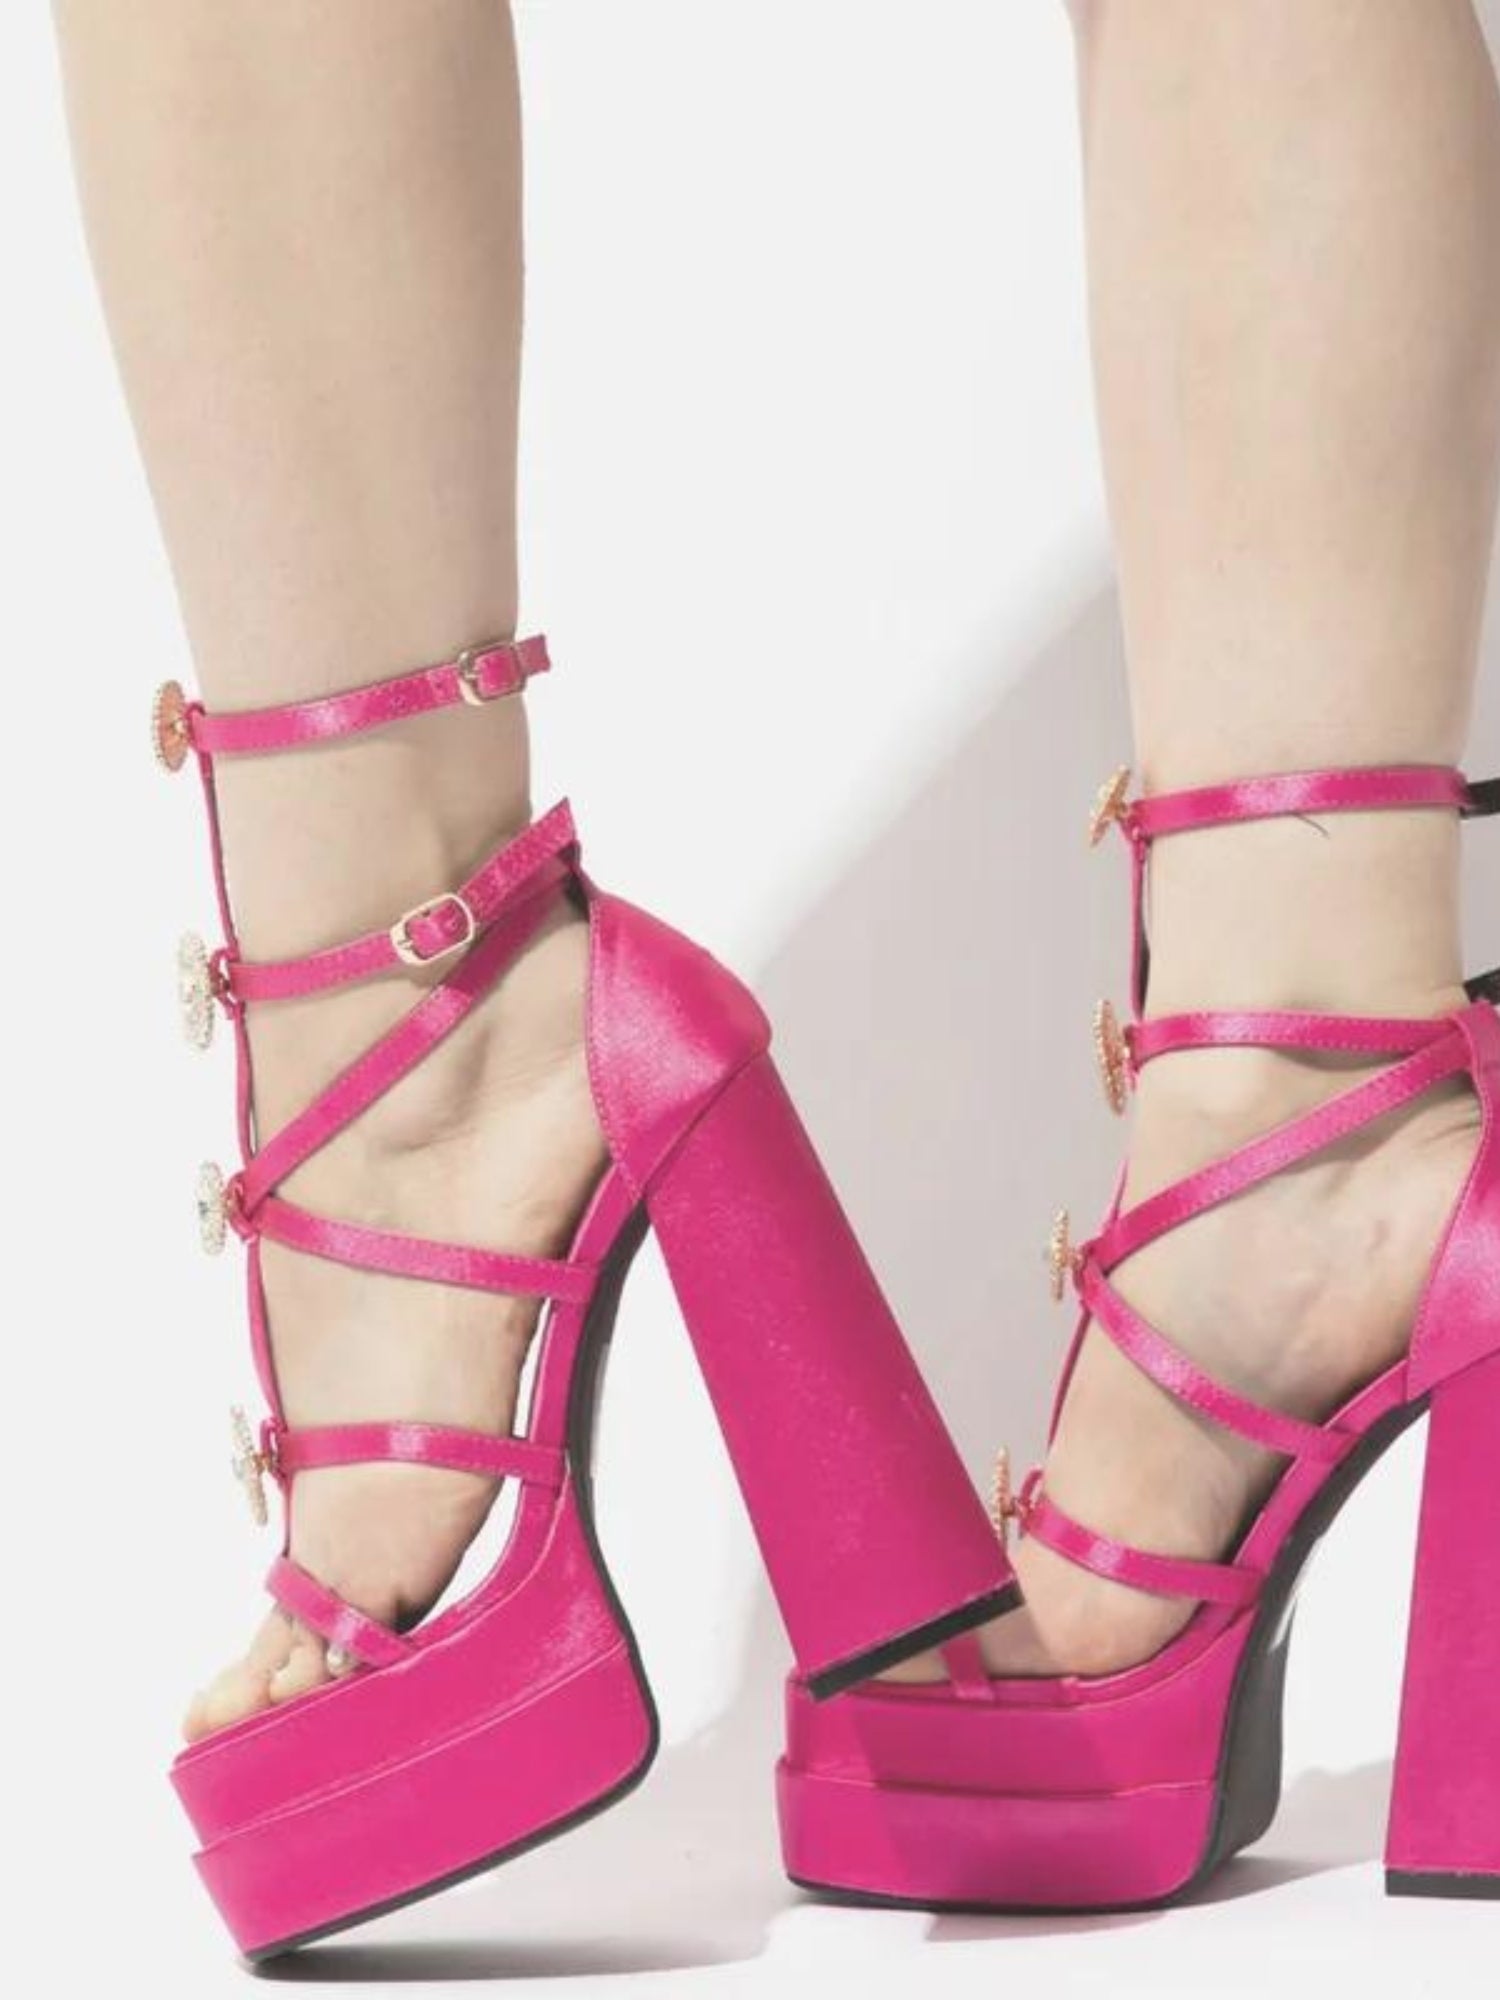 The Hot Pink Italia Platforms, Shoes, ISC - Ivory Sheep Collection Limited